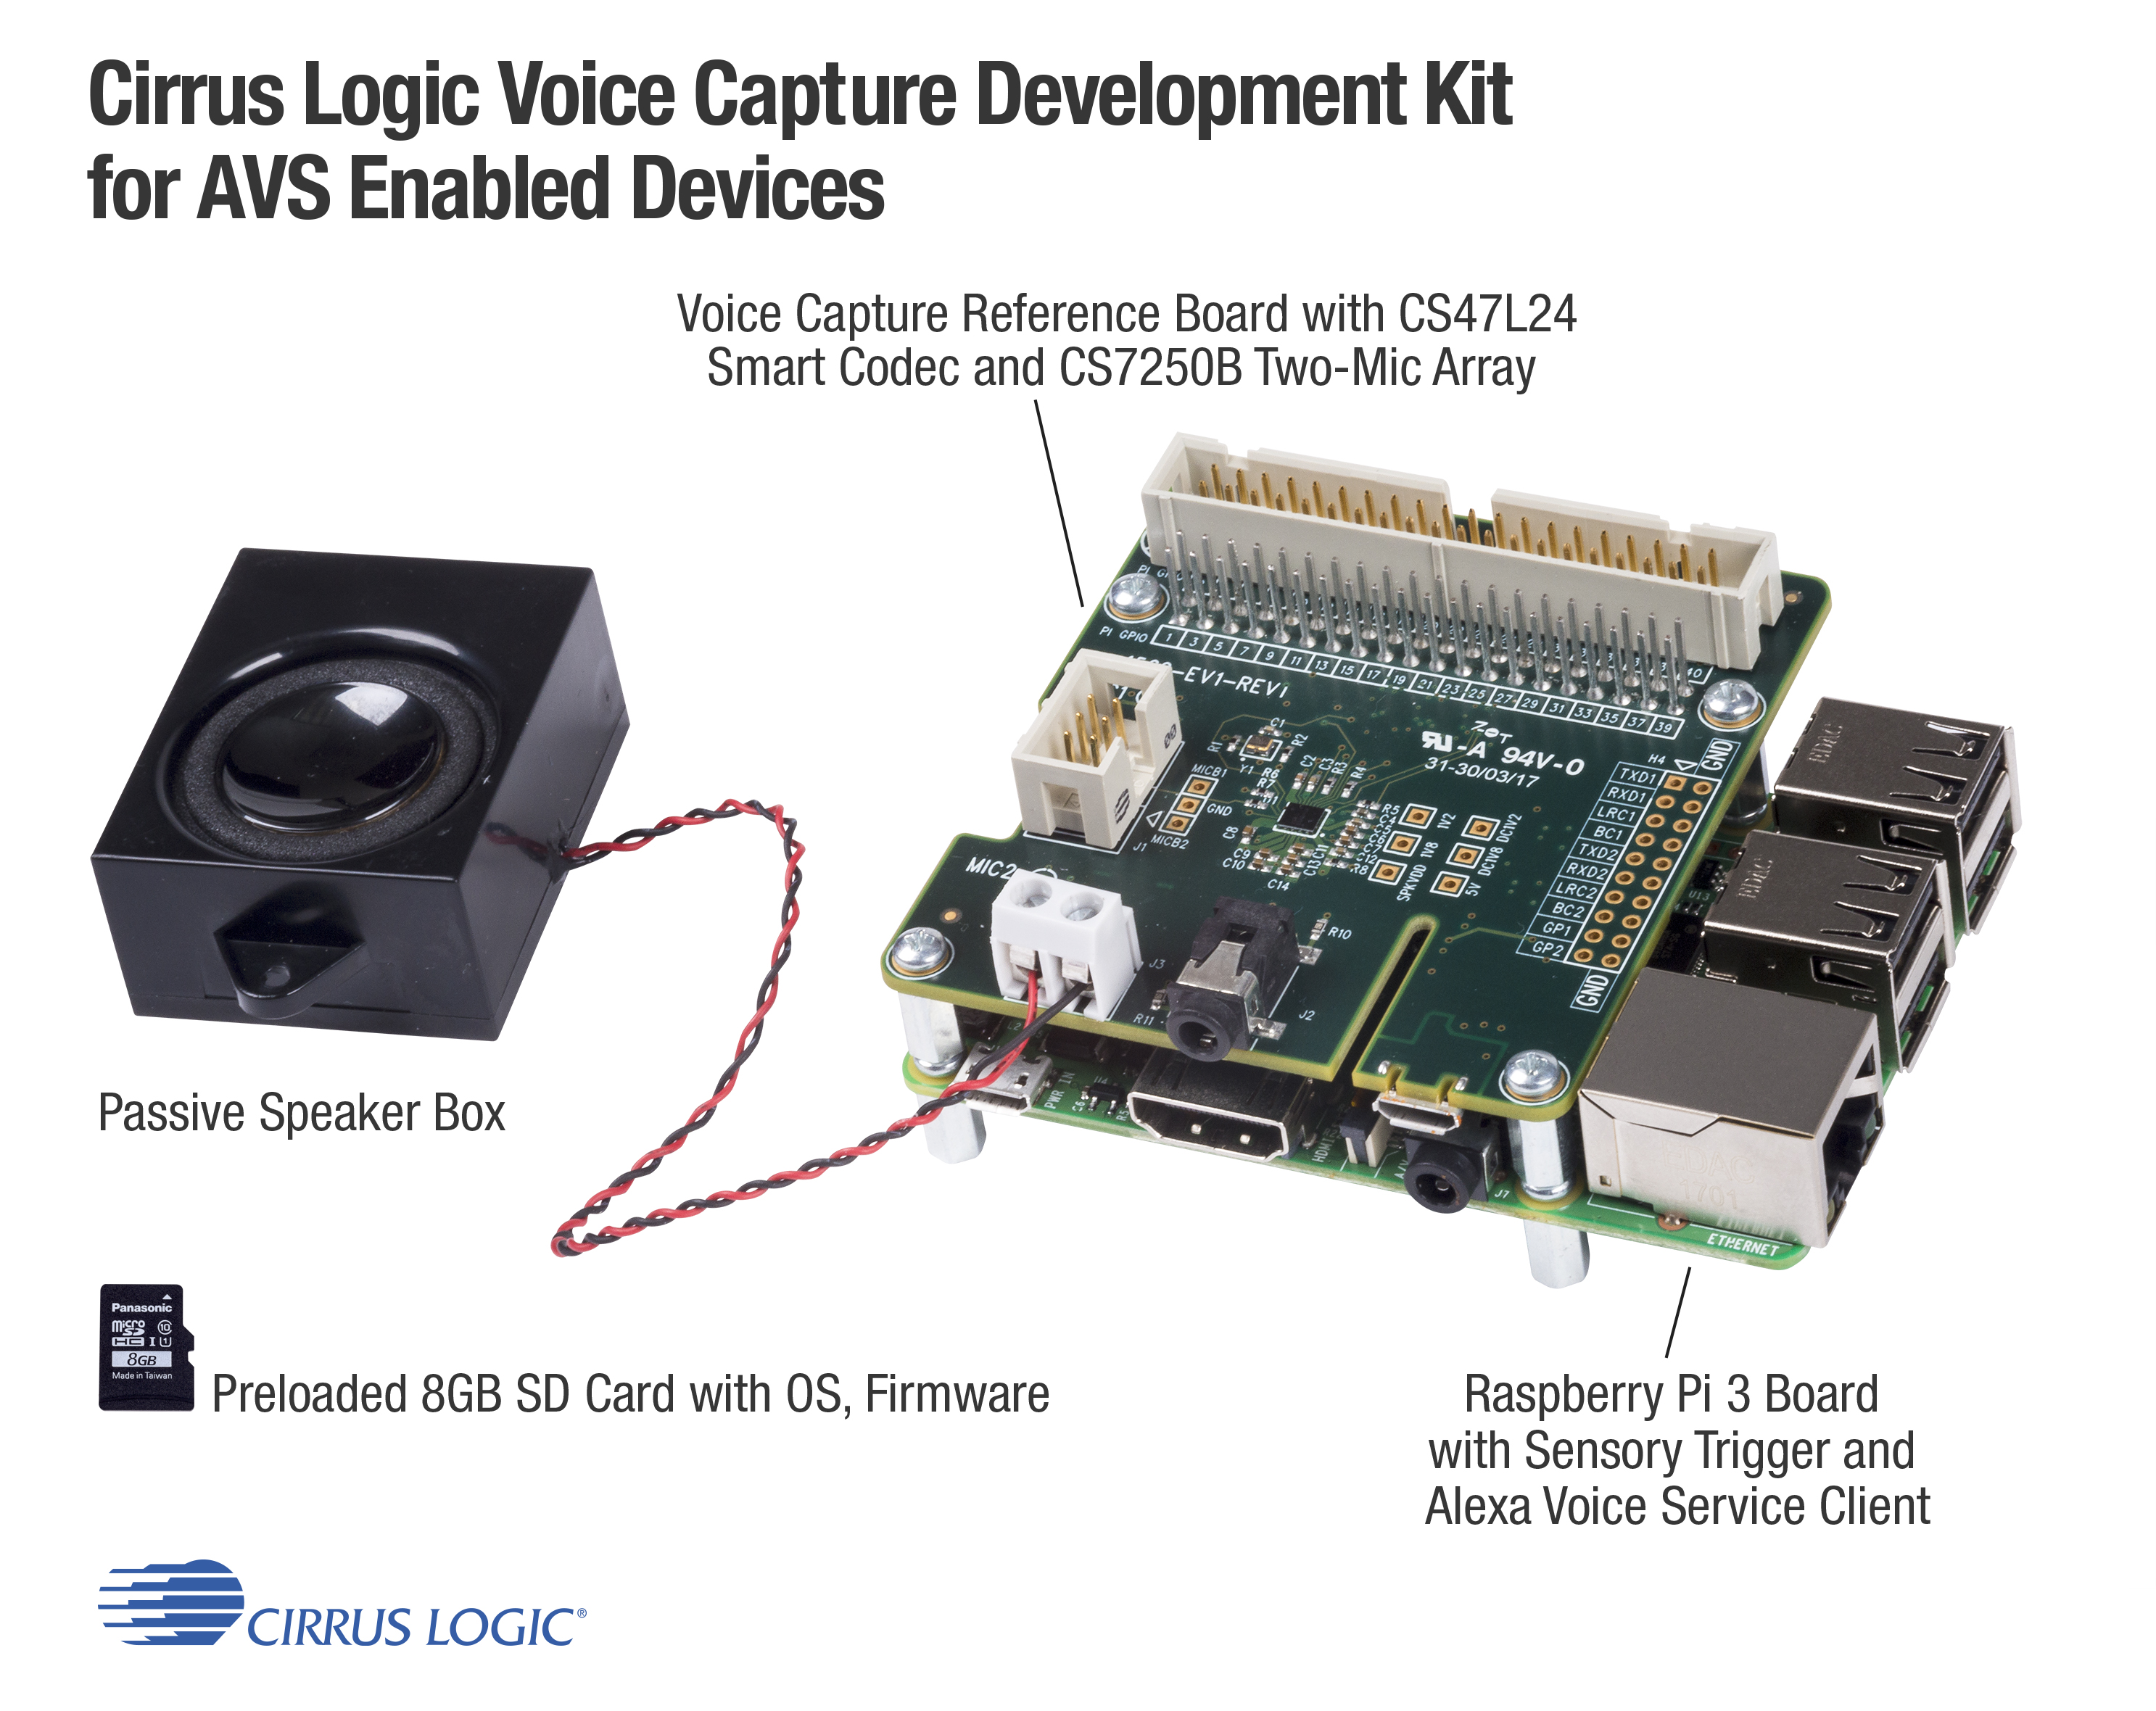 Cirrus Logic Accelerates Design of Voice-Enabled Devices with Development Kit for Amazon Alexa Voice Service